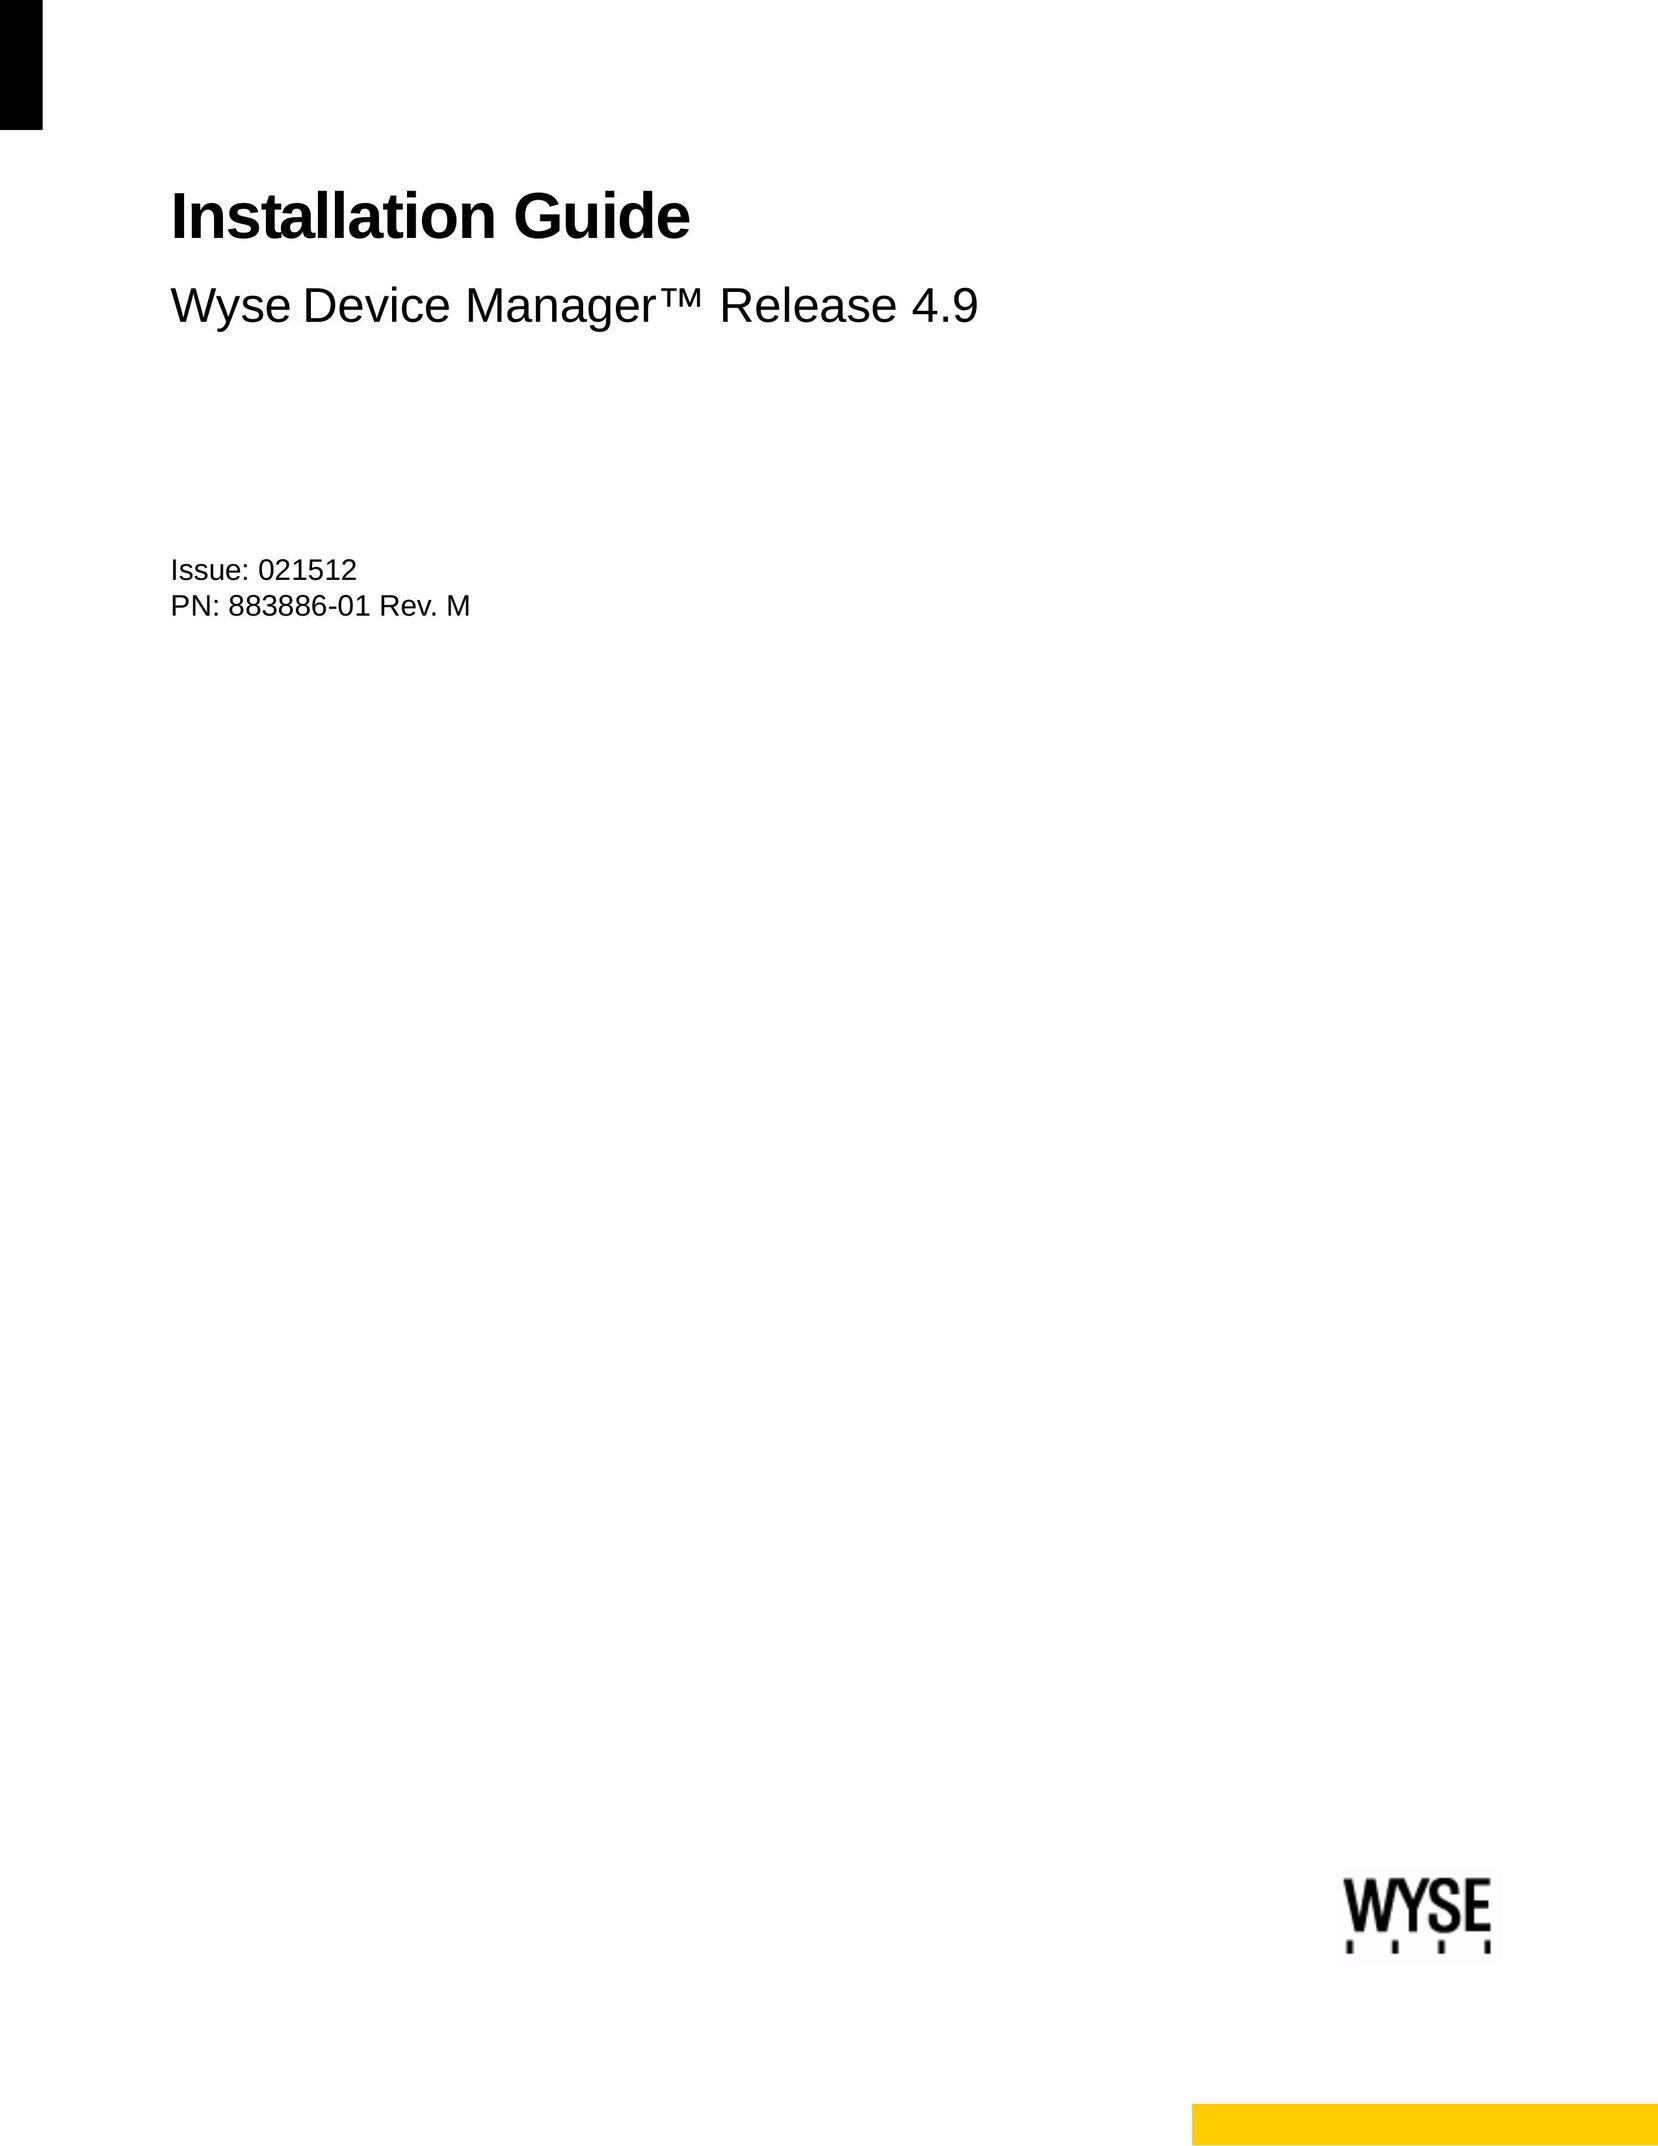 Wyse Technology wyse devise manager release 4.9 Pet Fence User Manual